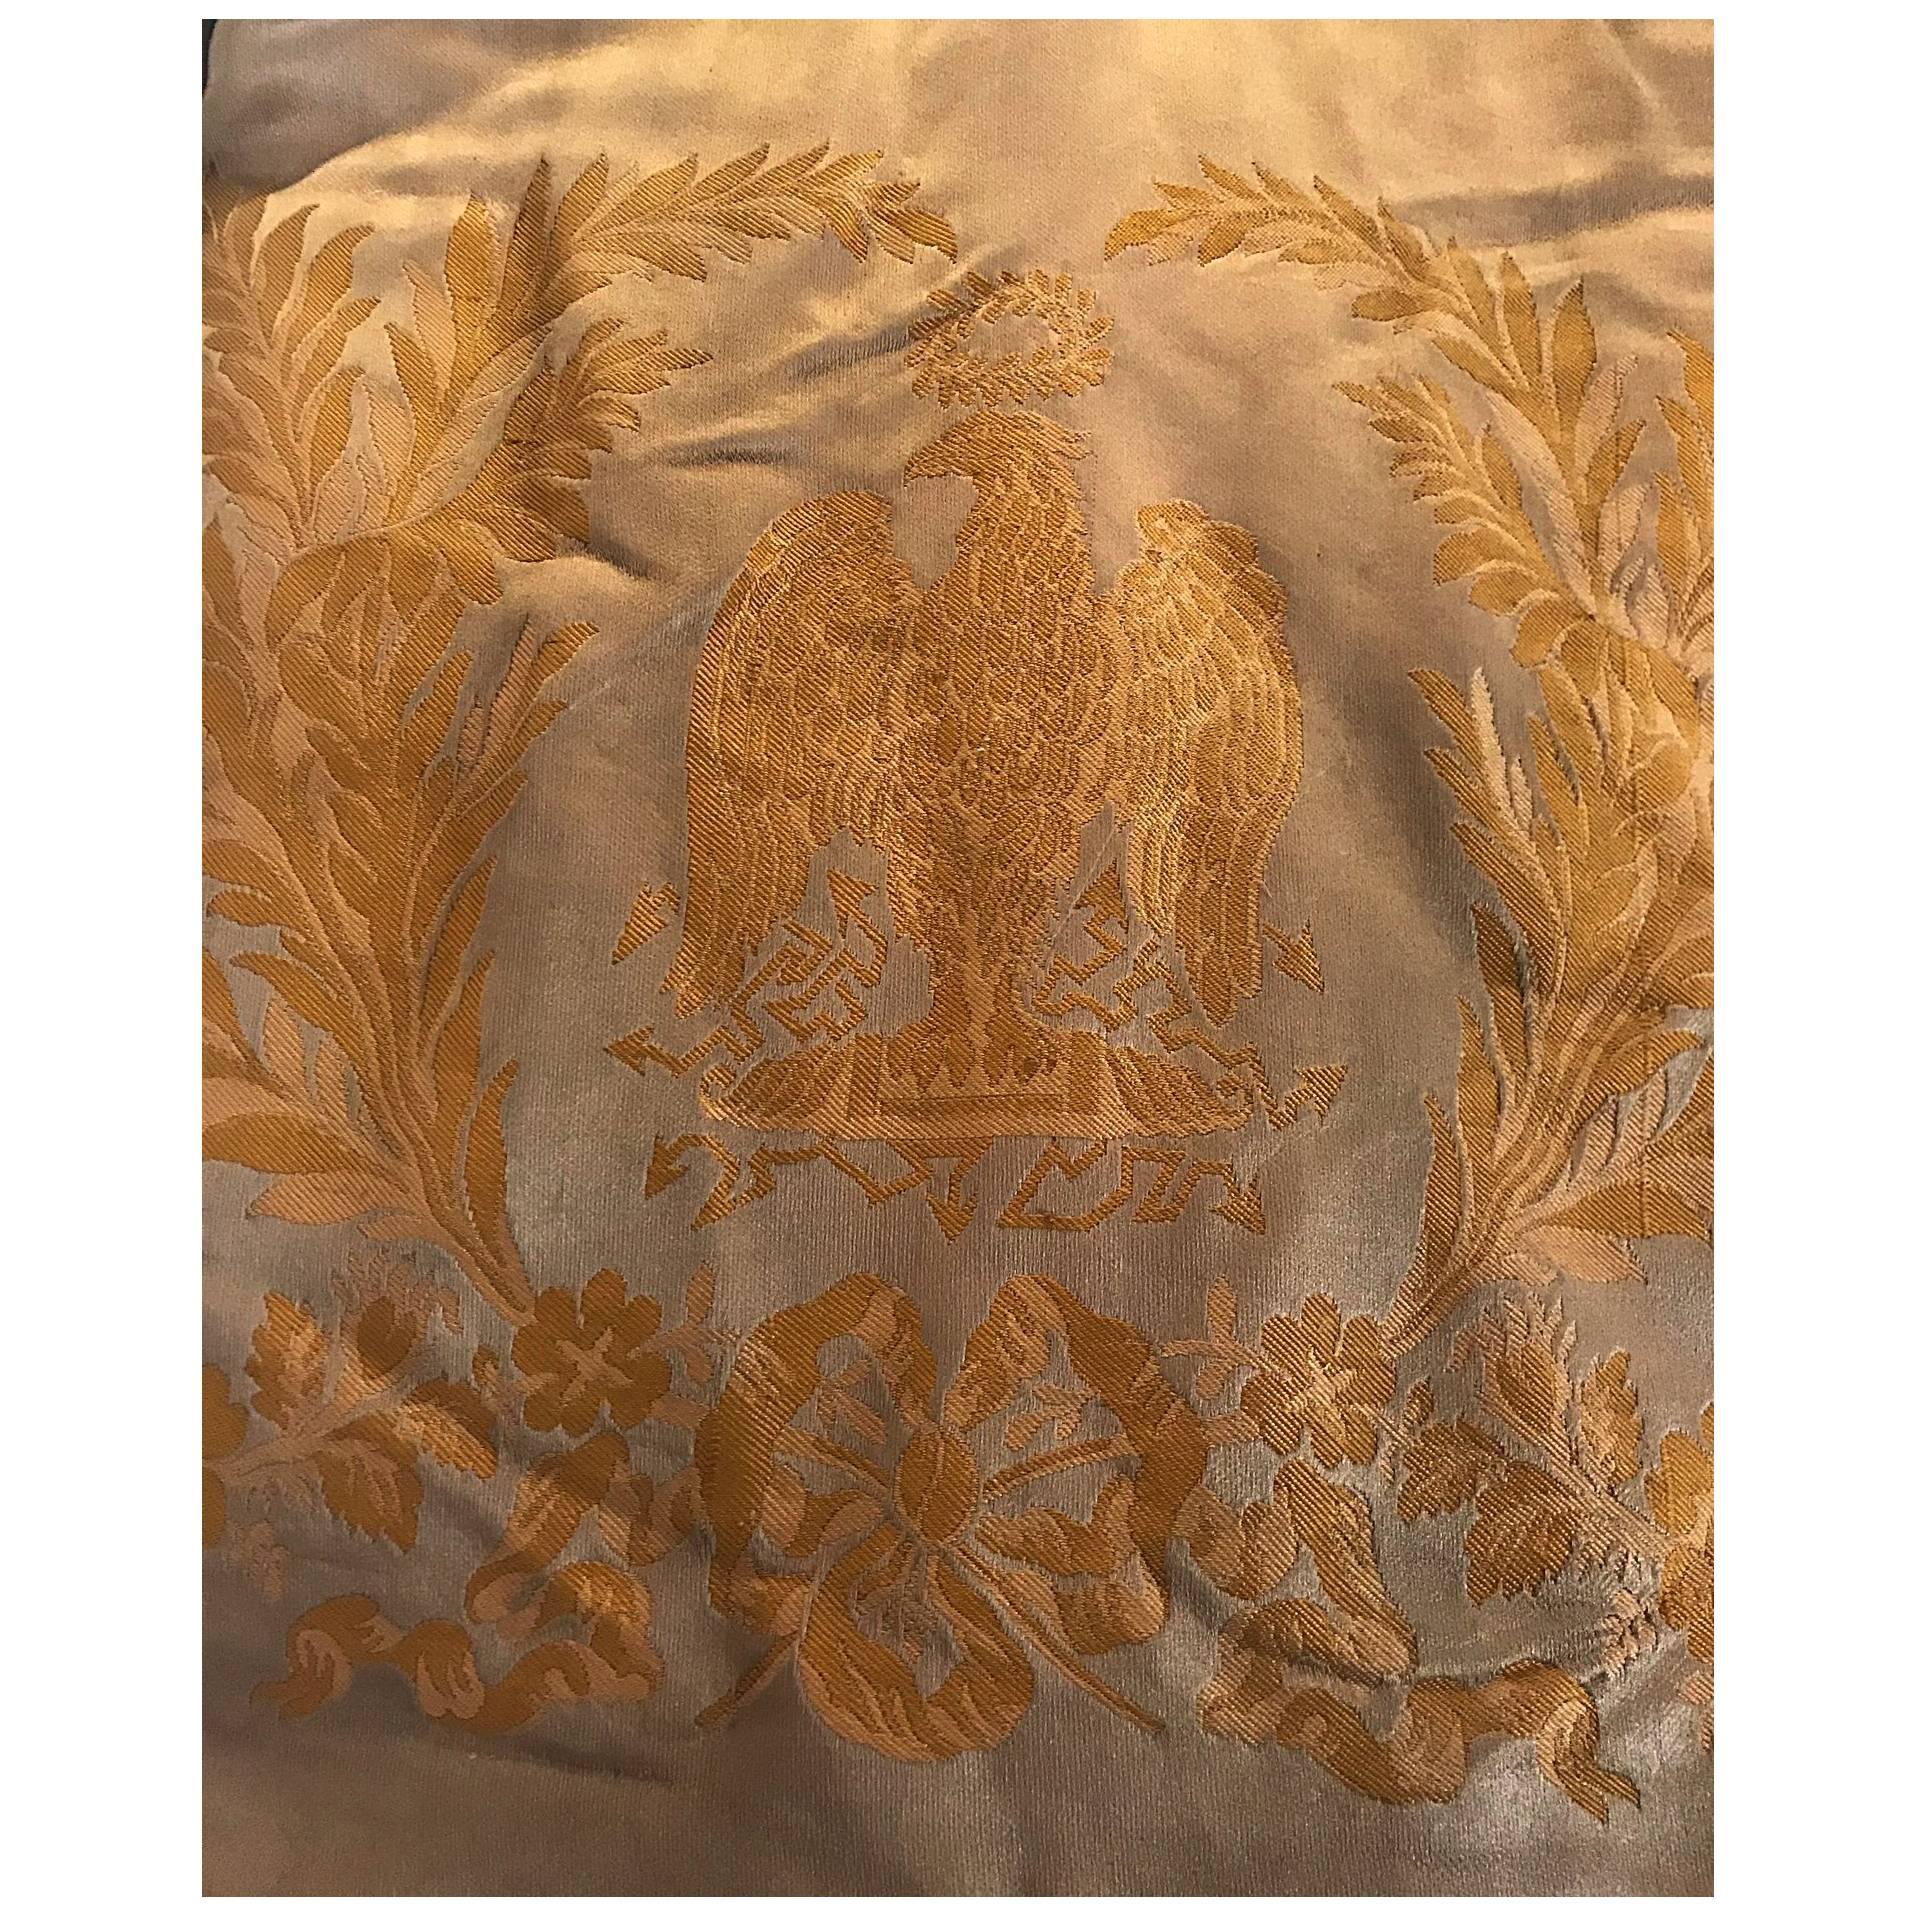 Napoleon Empire 1809 Historic Palais Beauharnais Curtains his personal Bed ! For Sale